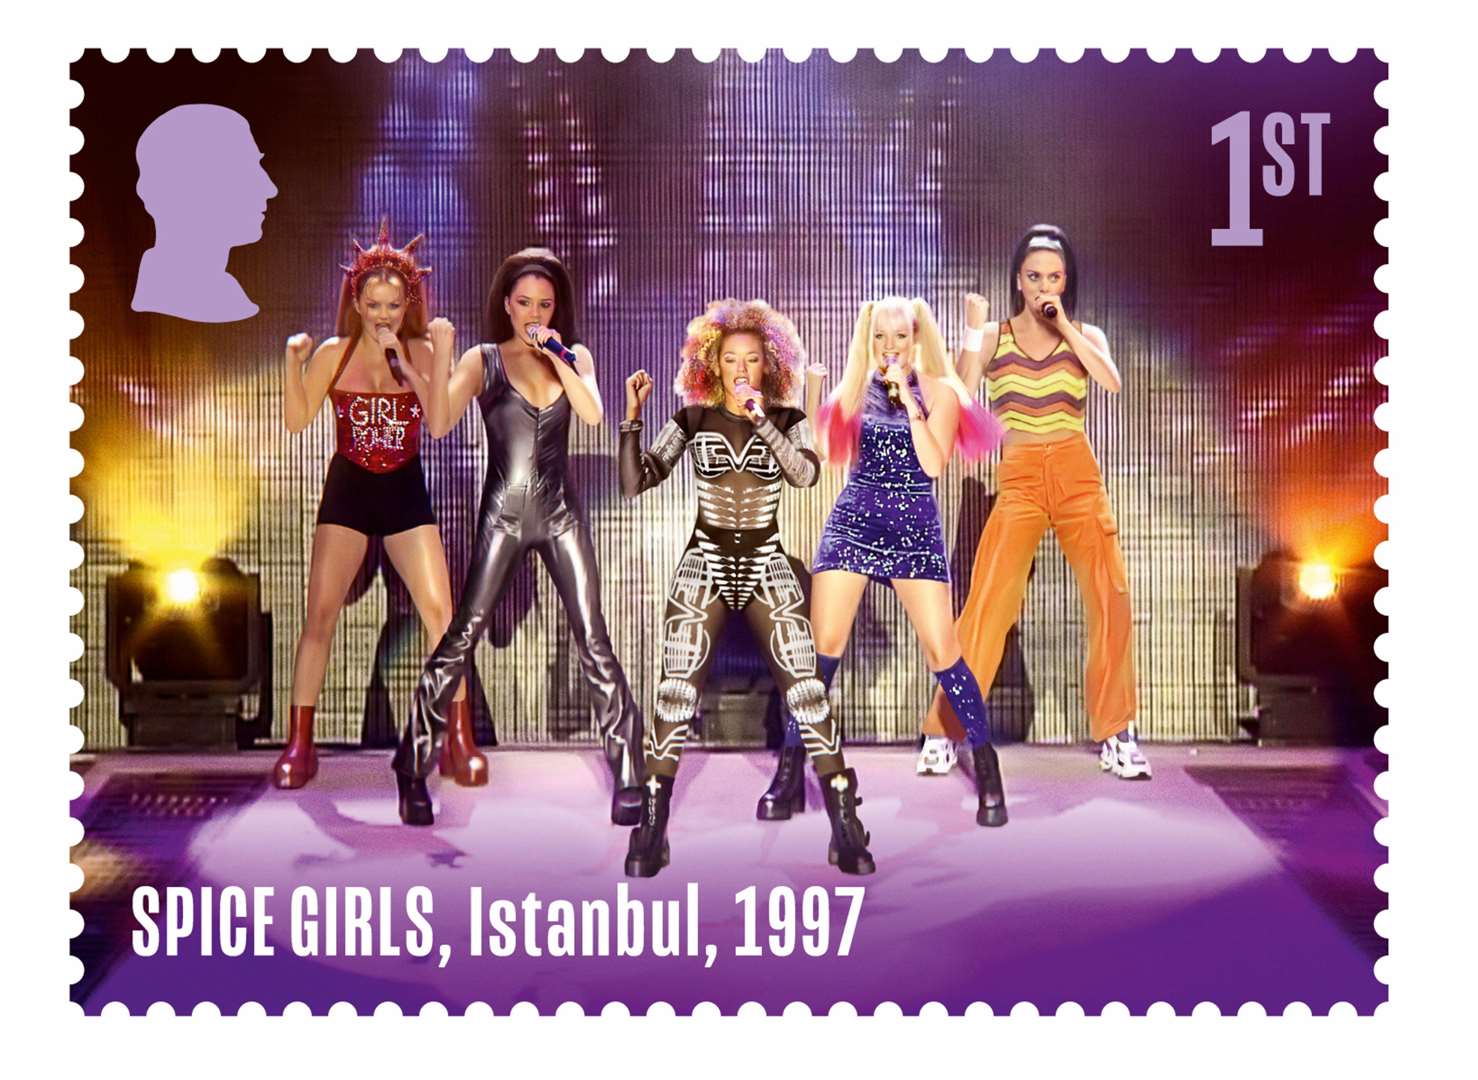 Spice Girls are getting their own set of stamps to mark their 30th birthday. Image: Royal Mail.